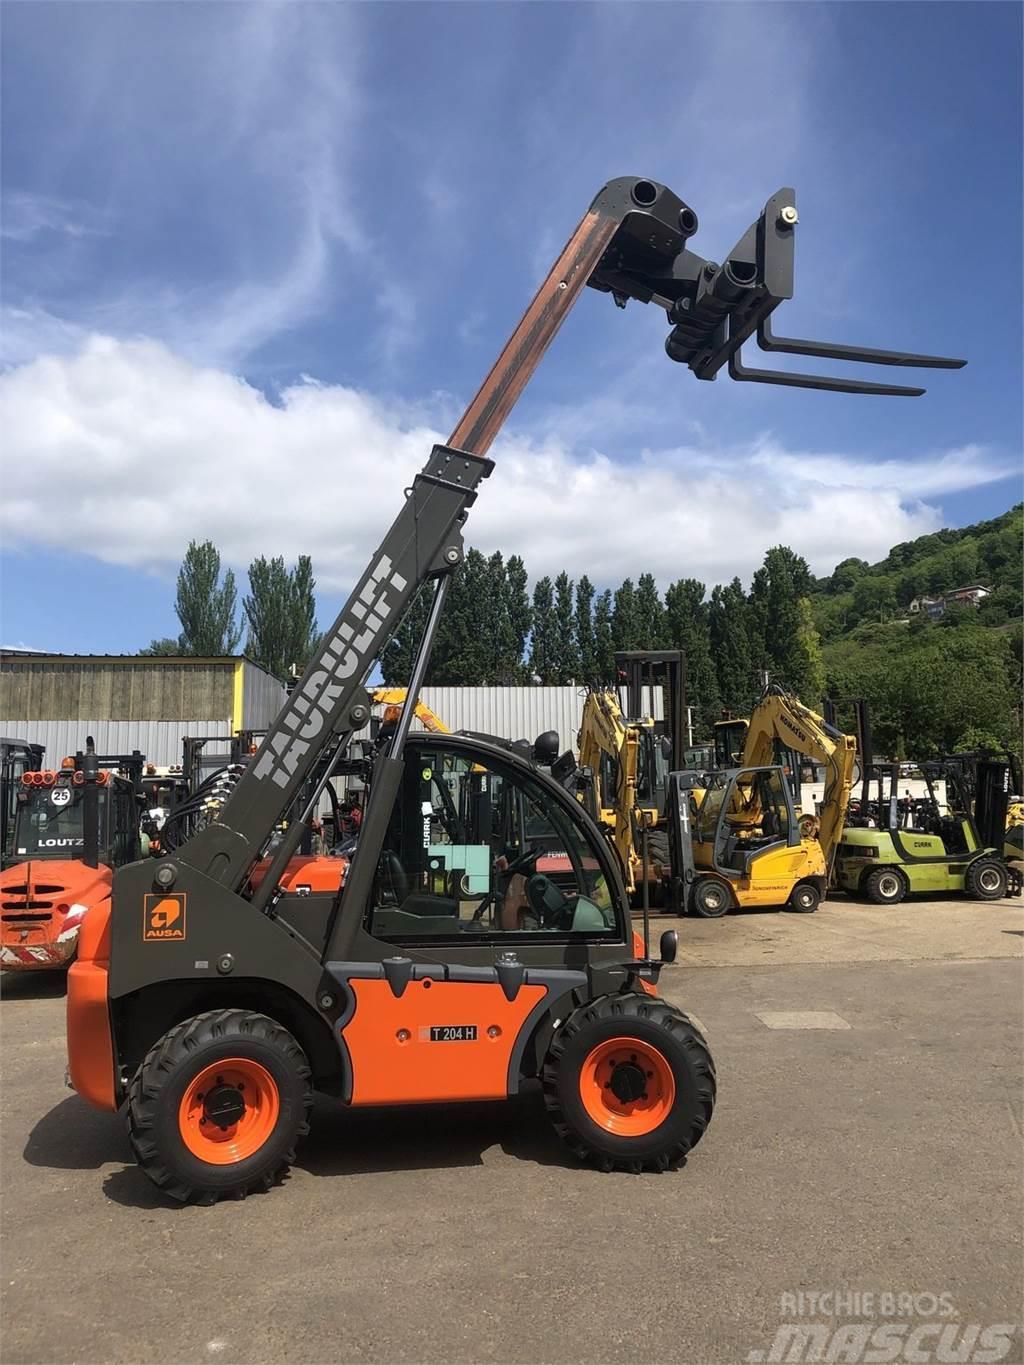 Ausa T204H Telehandlers for agriculture